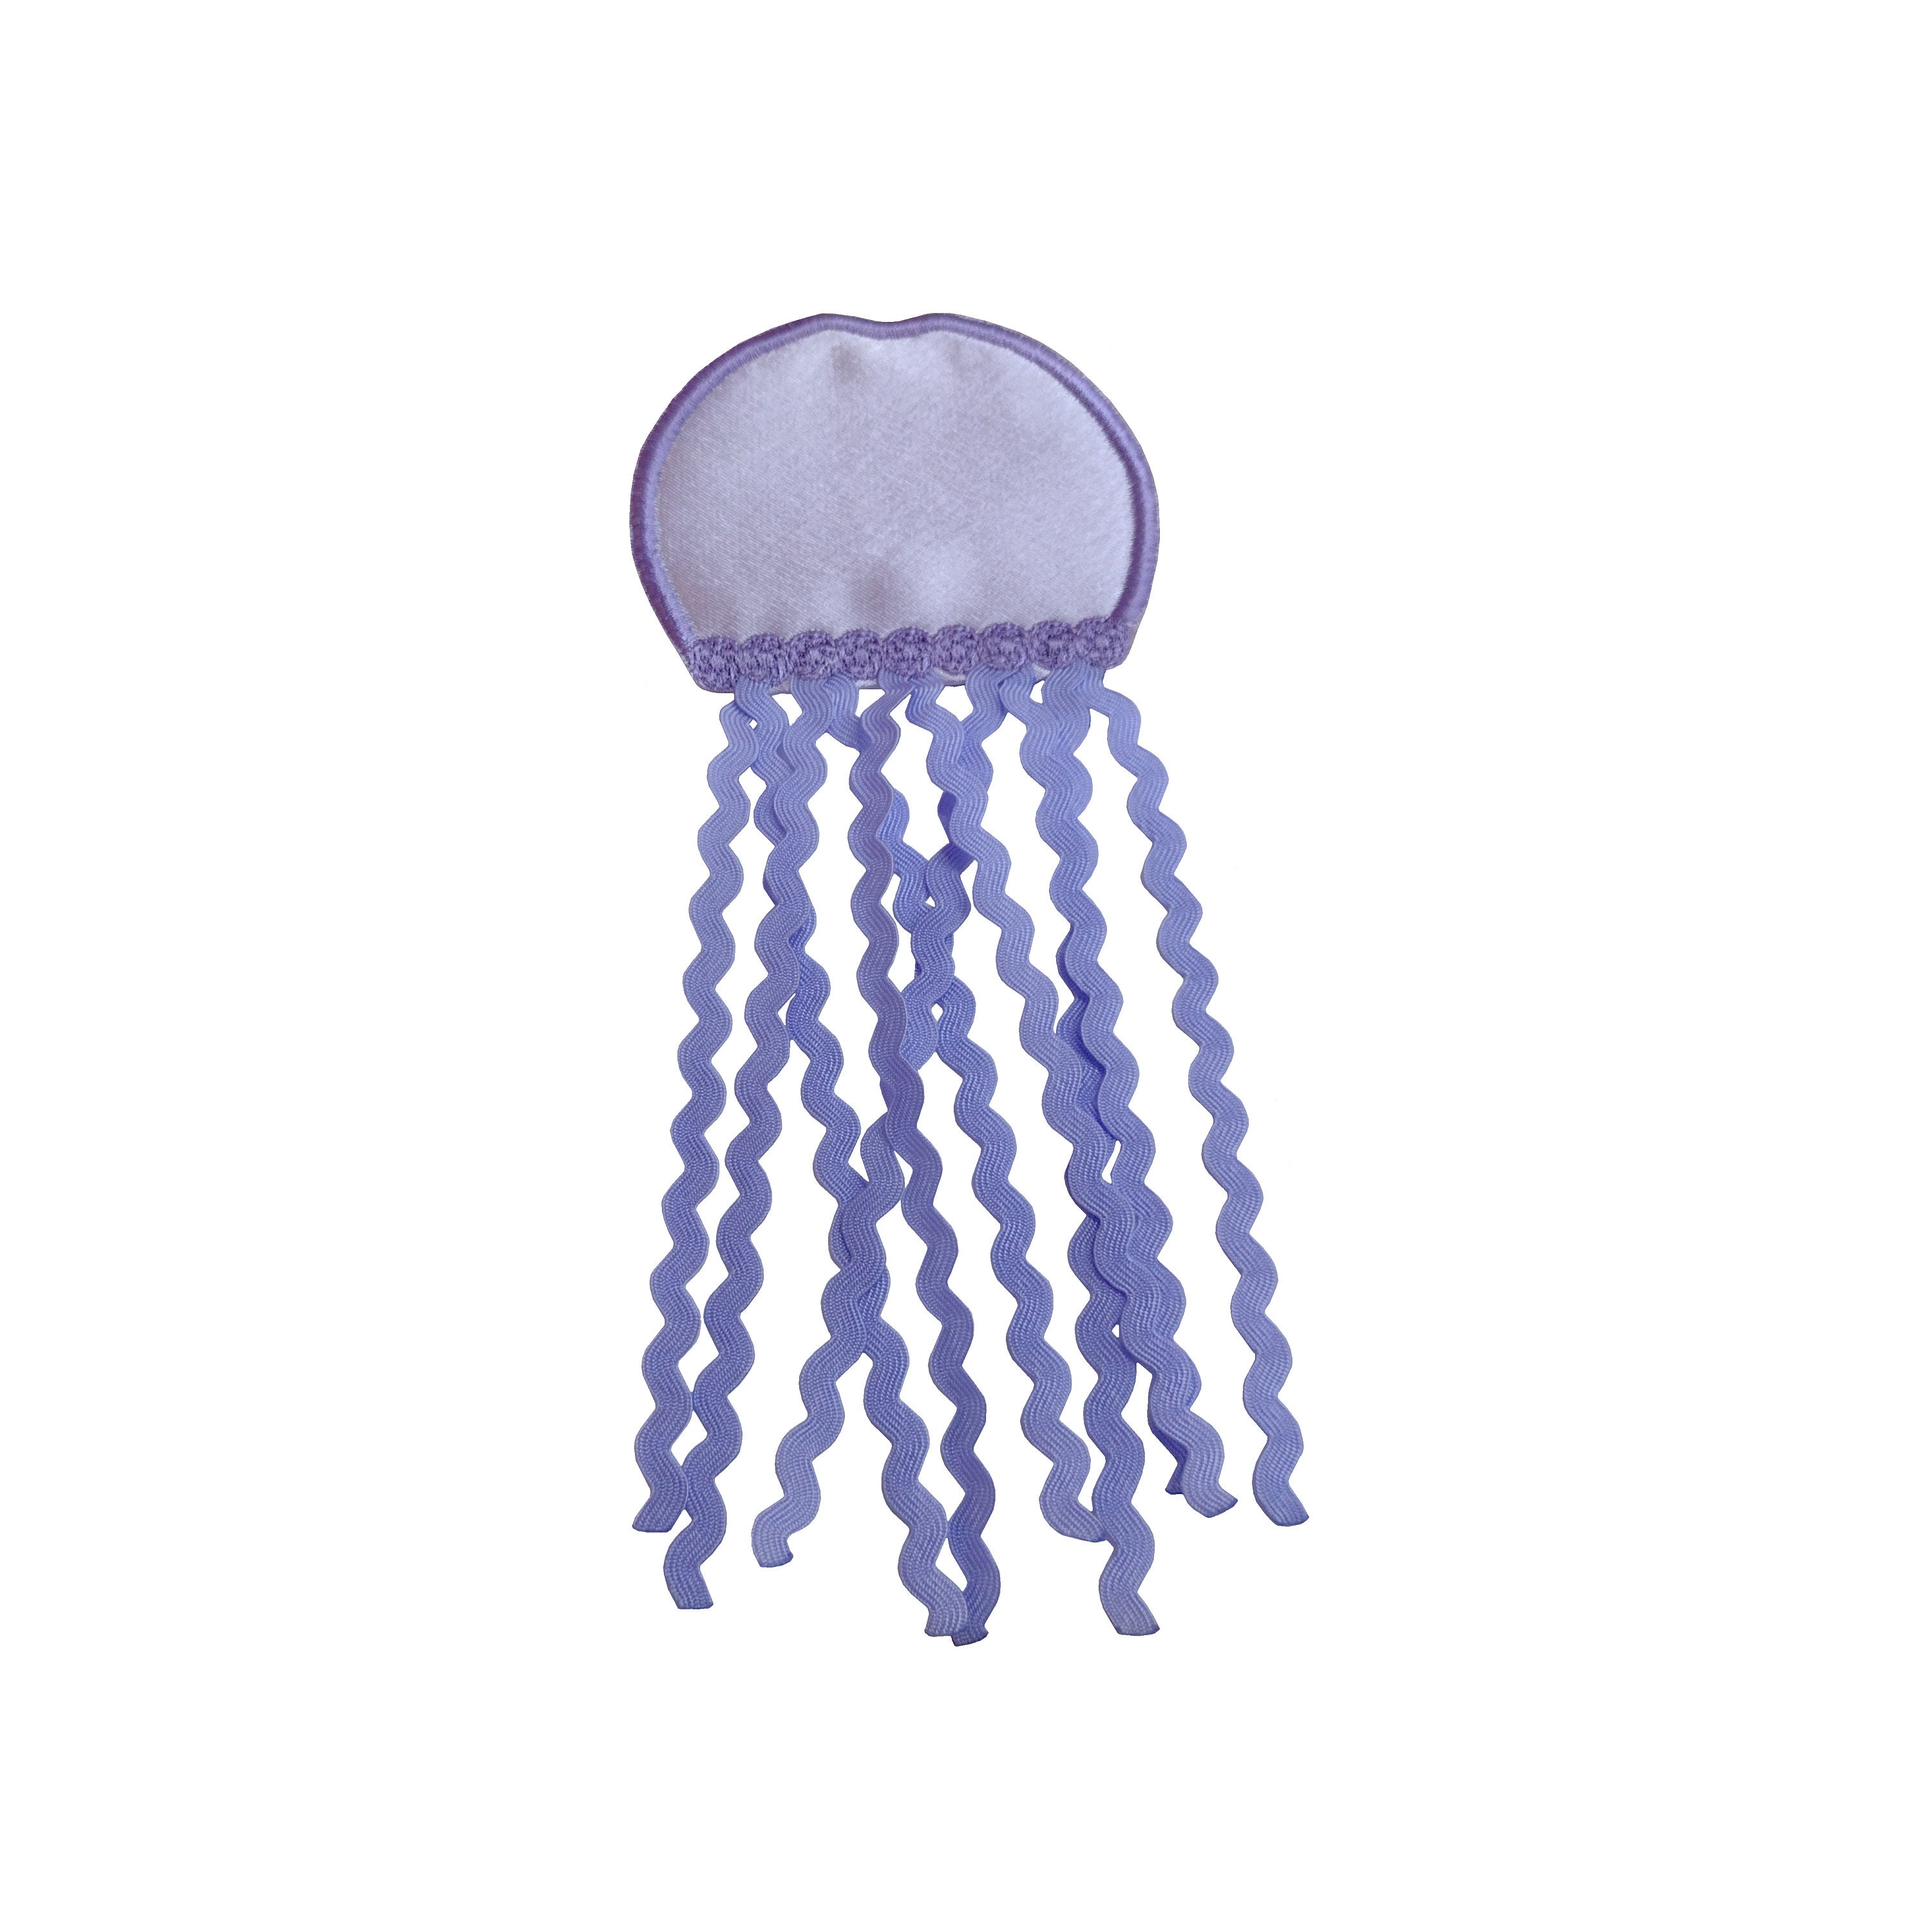 Jellyfish Clothing Patches Iron on or Sew on Patches 